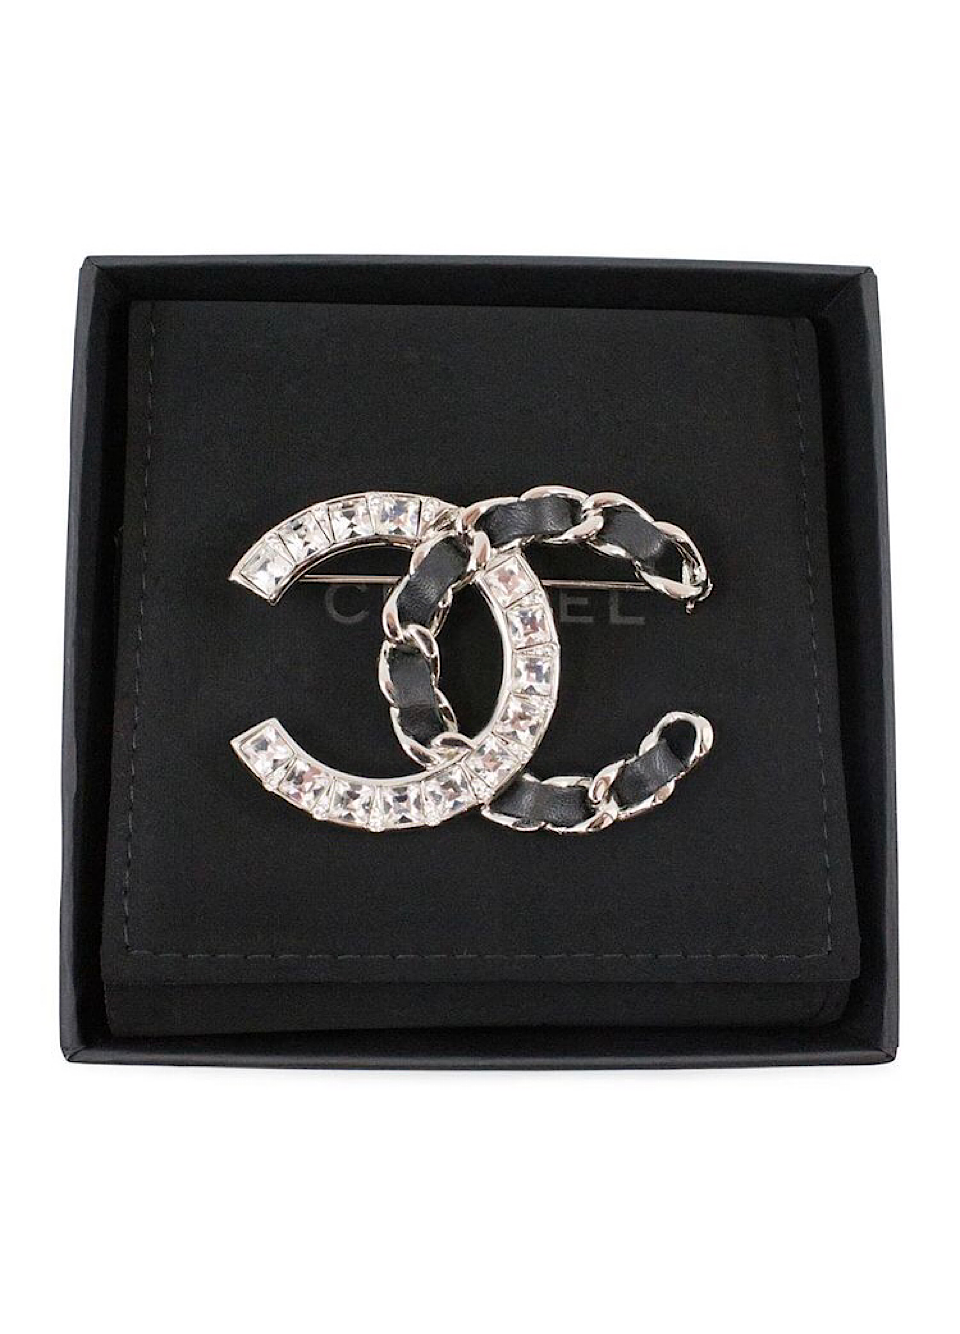 Chanel Black Leather Chainlink CC Pin Brooch Chanel